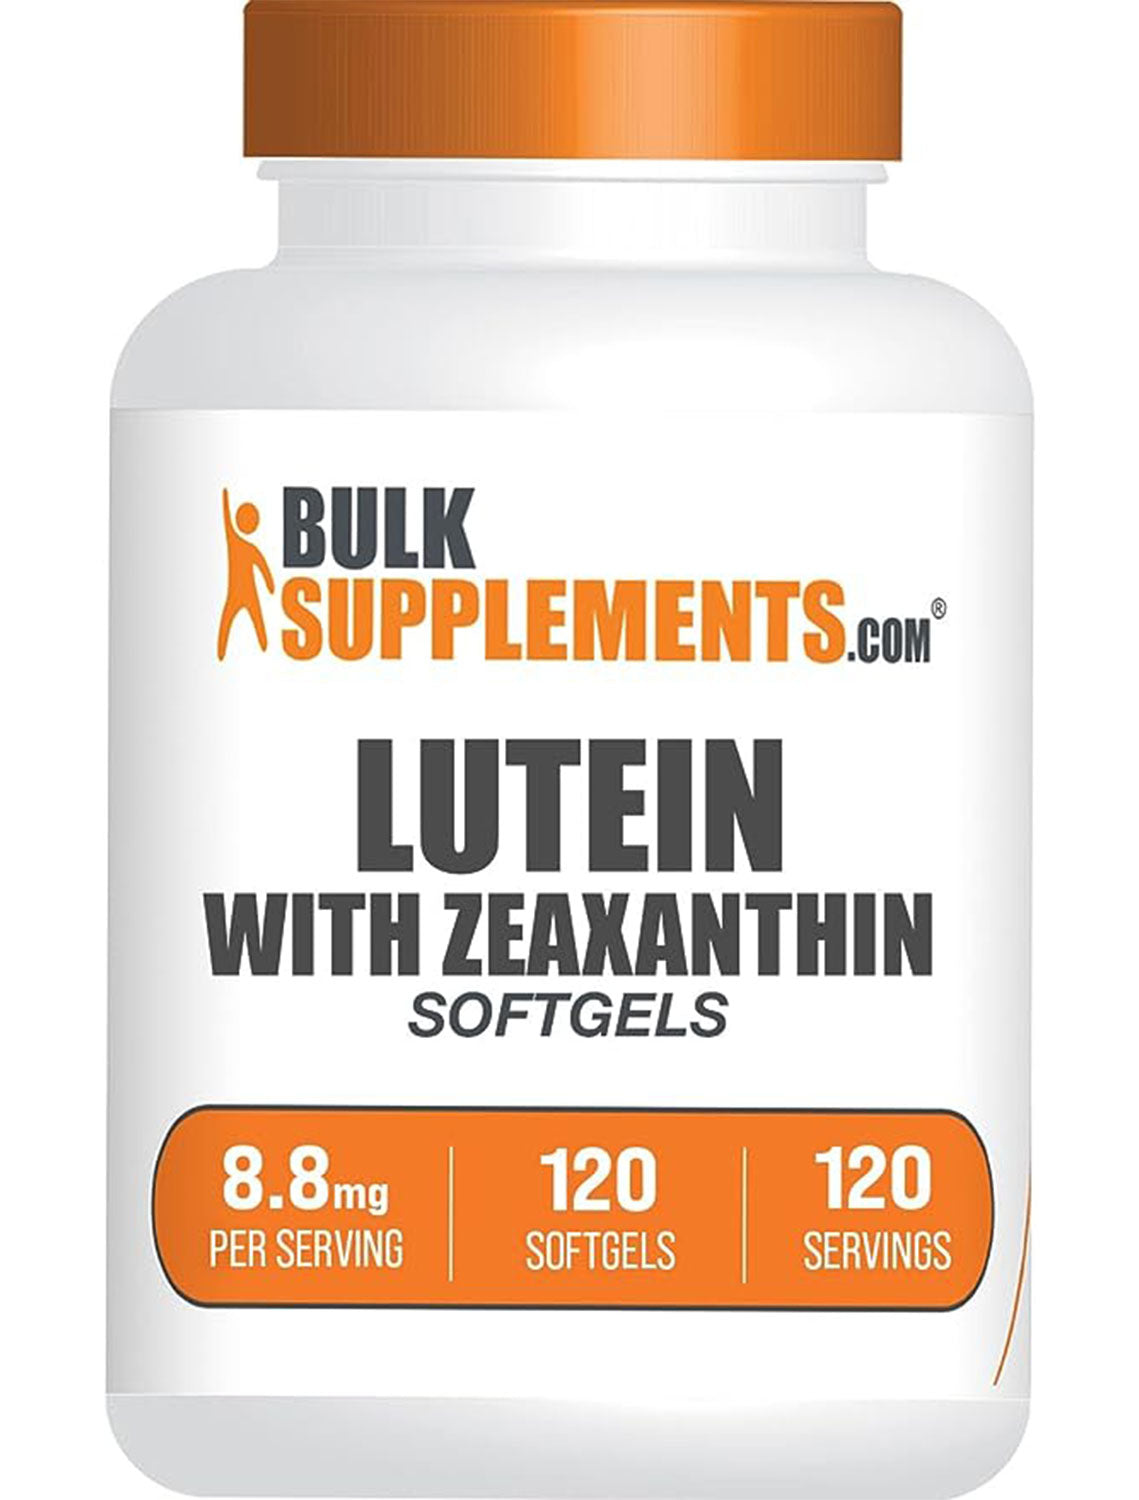 BulkSupplements Lutein with Zeaxanthin Softgels 8.8mg 120 softgels bottle